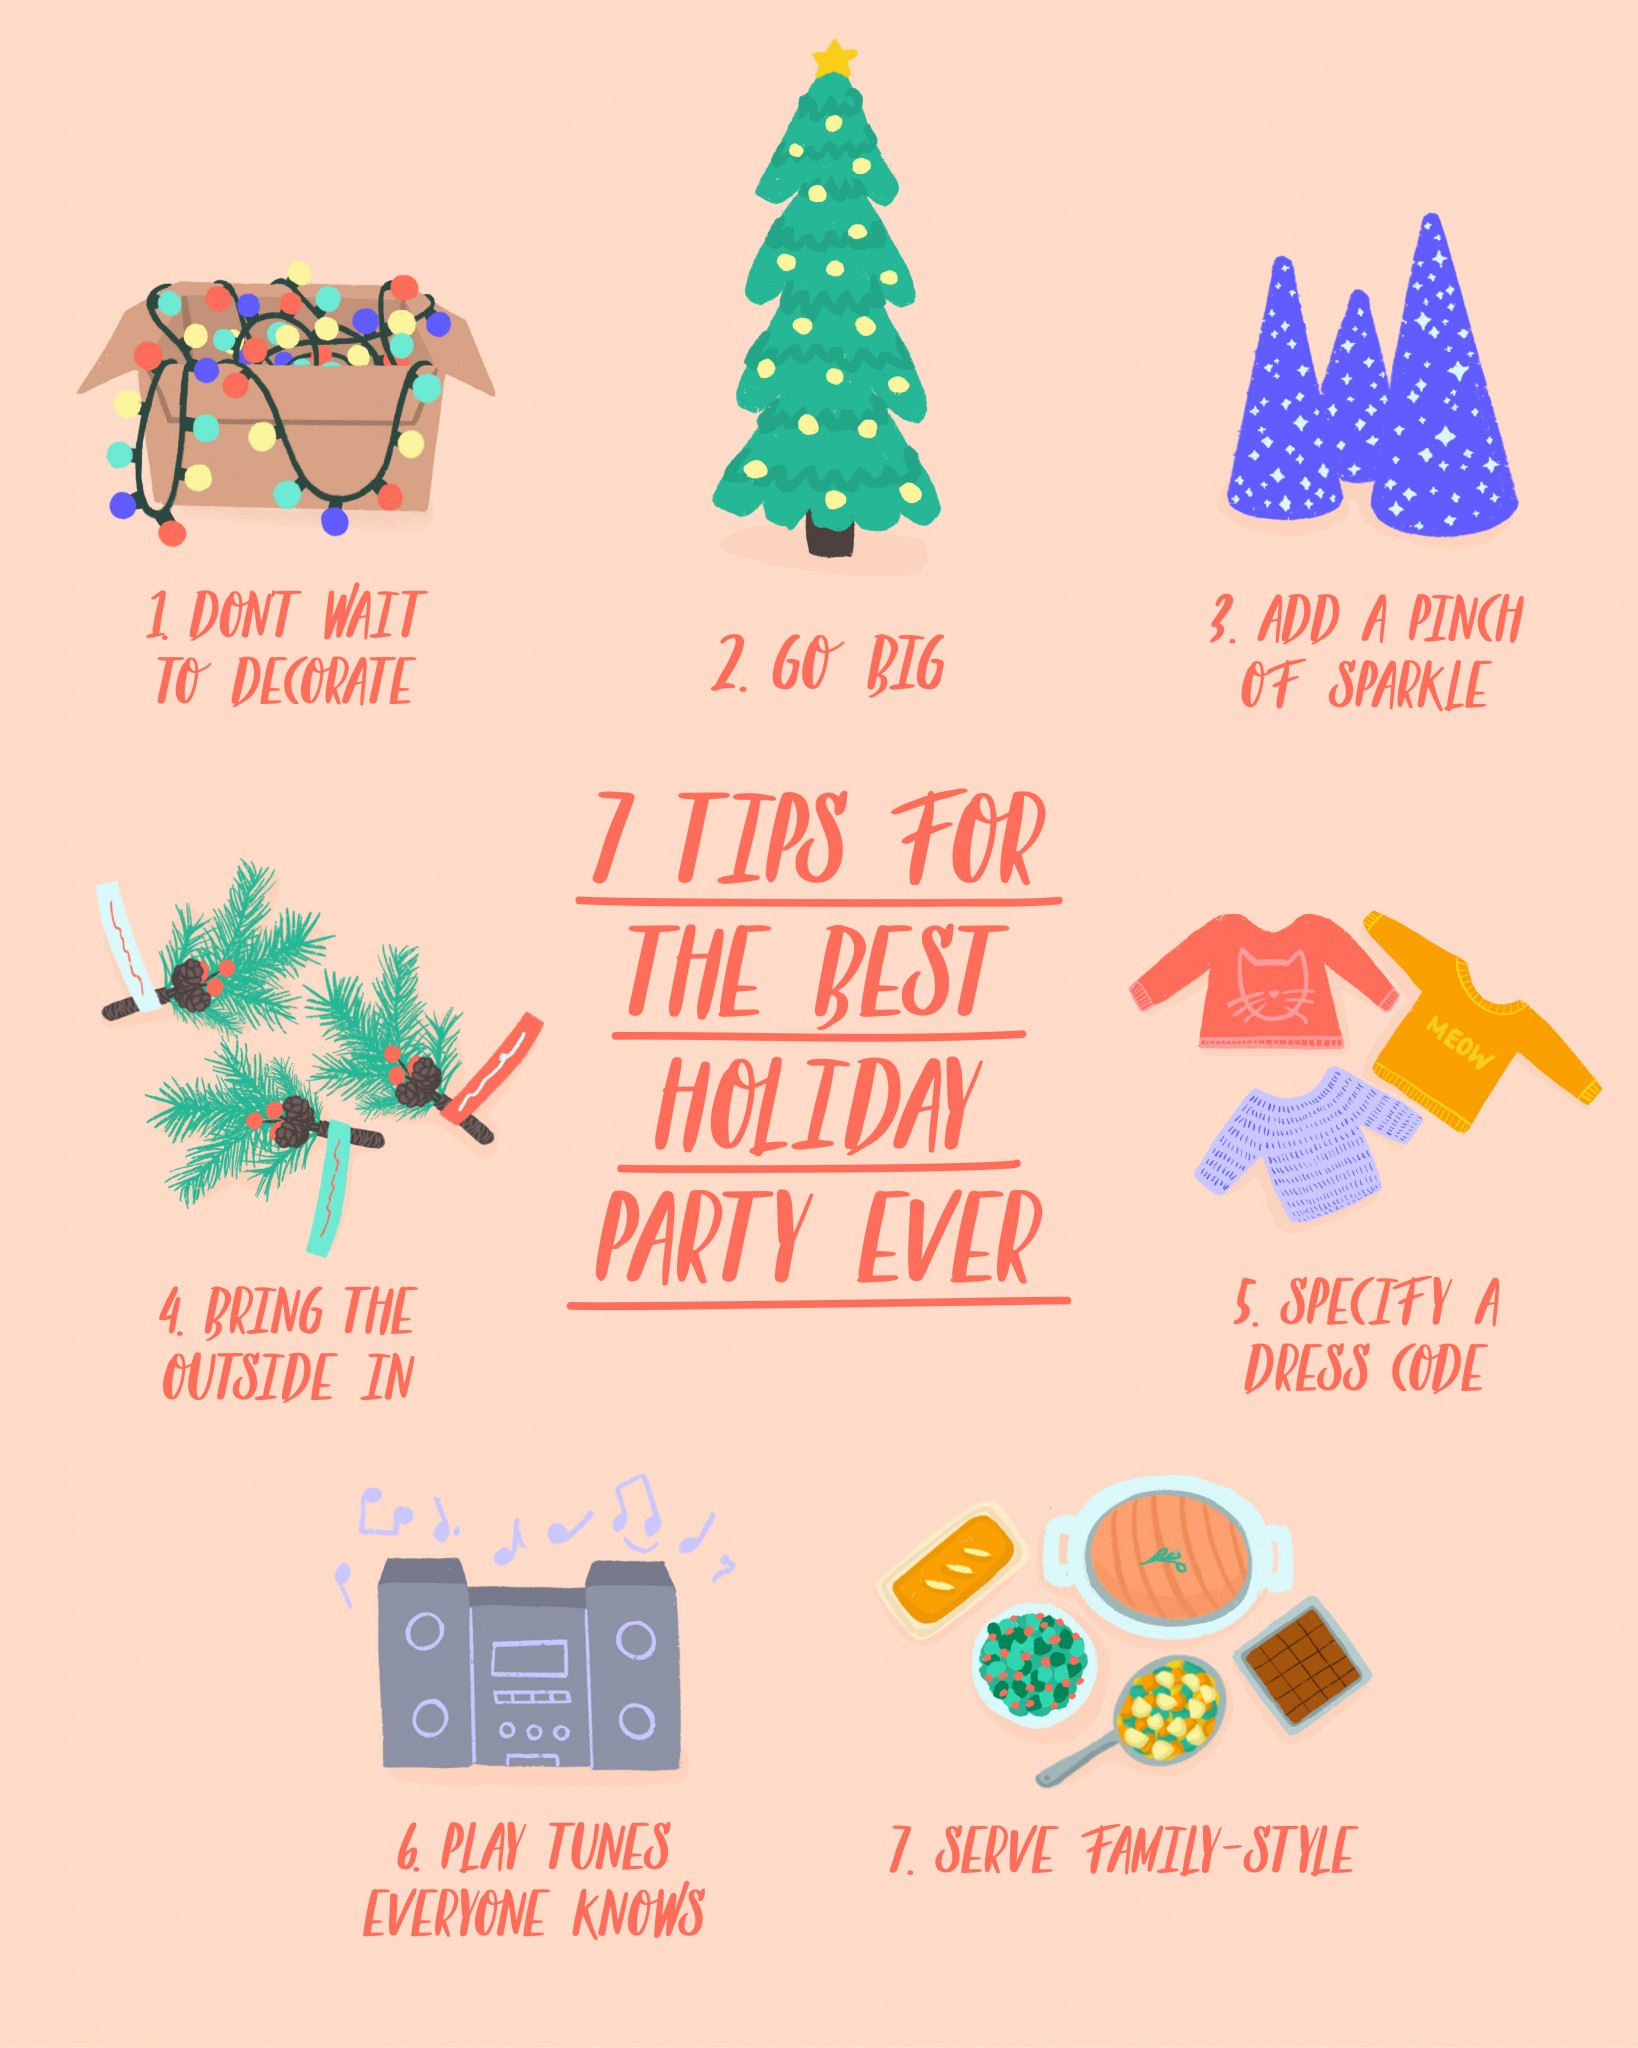 7 tips for the best holiday party ever - The Aesthetics of Joy by Ingrid  Fetell Lee